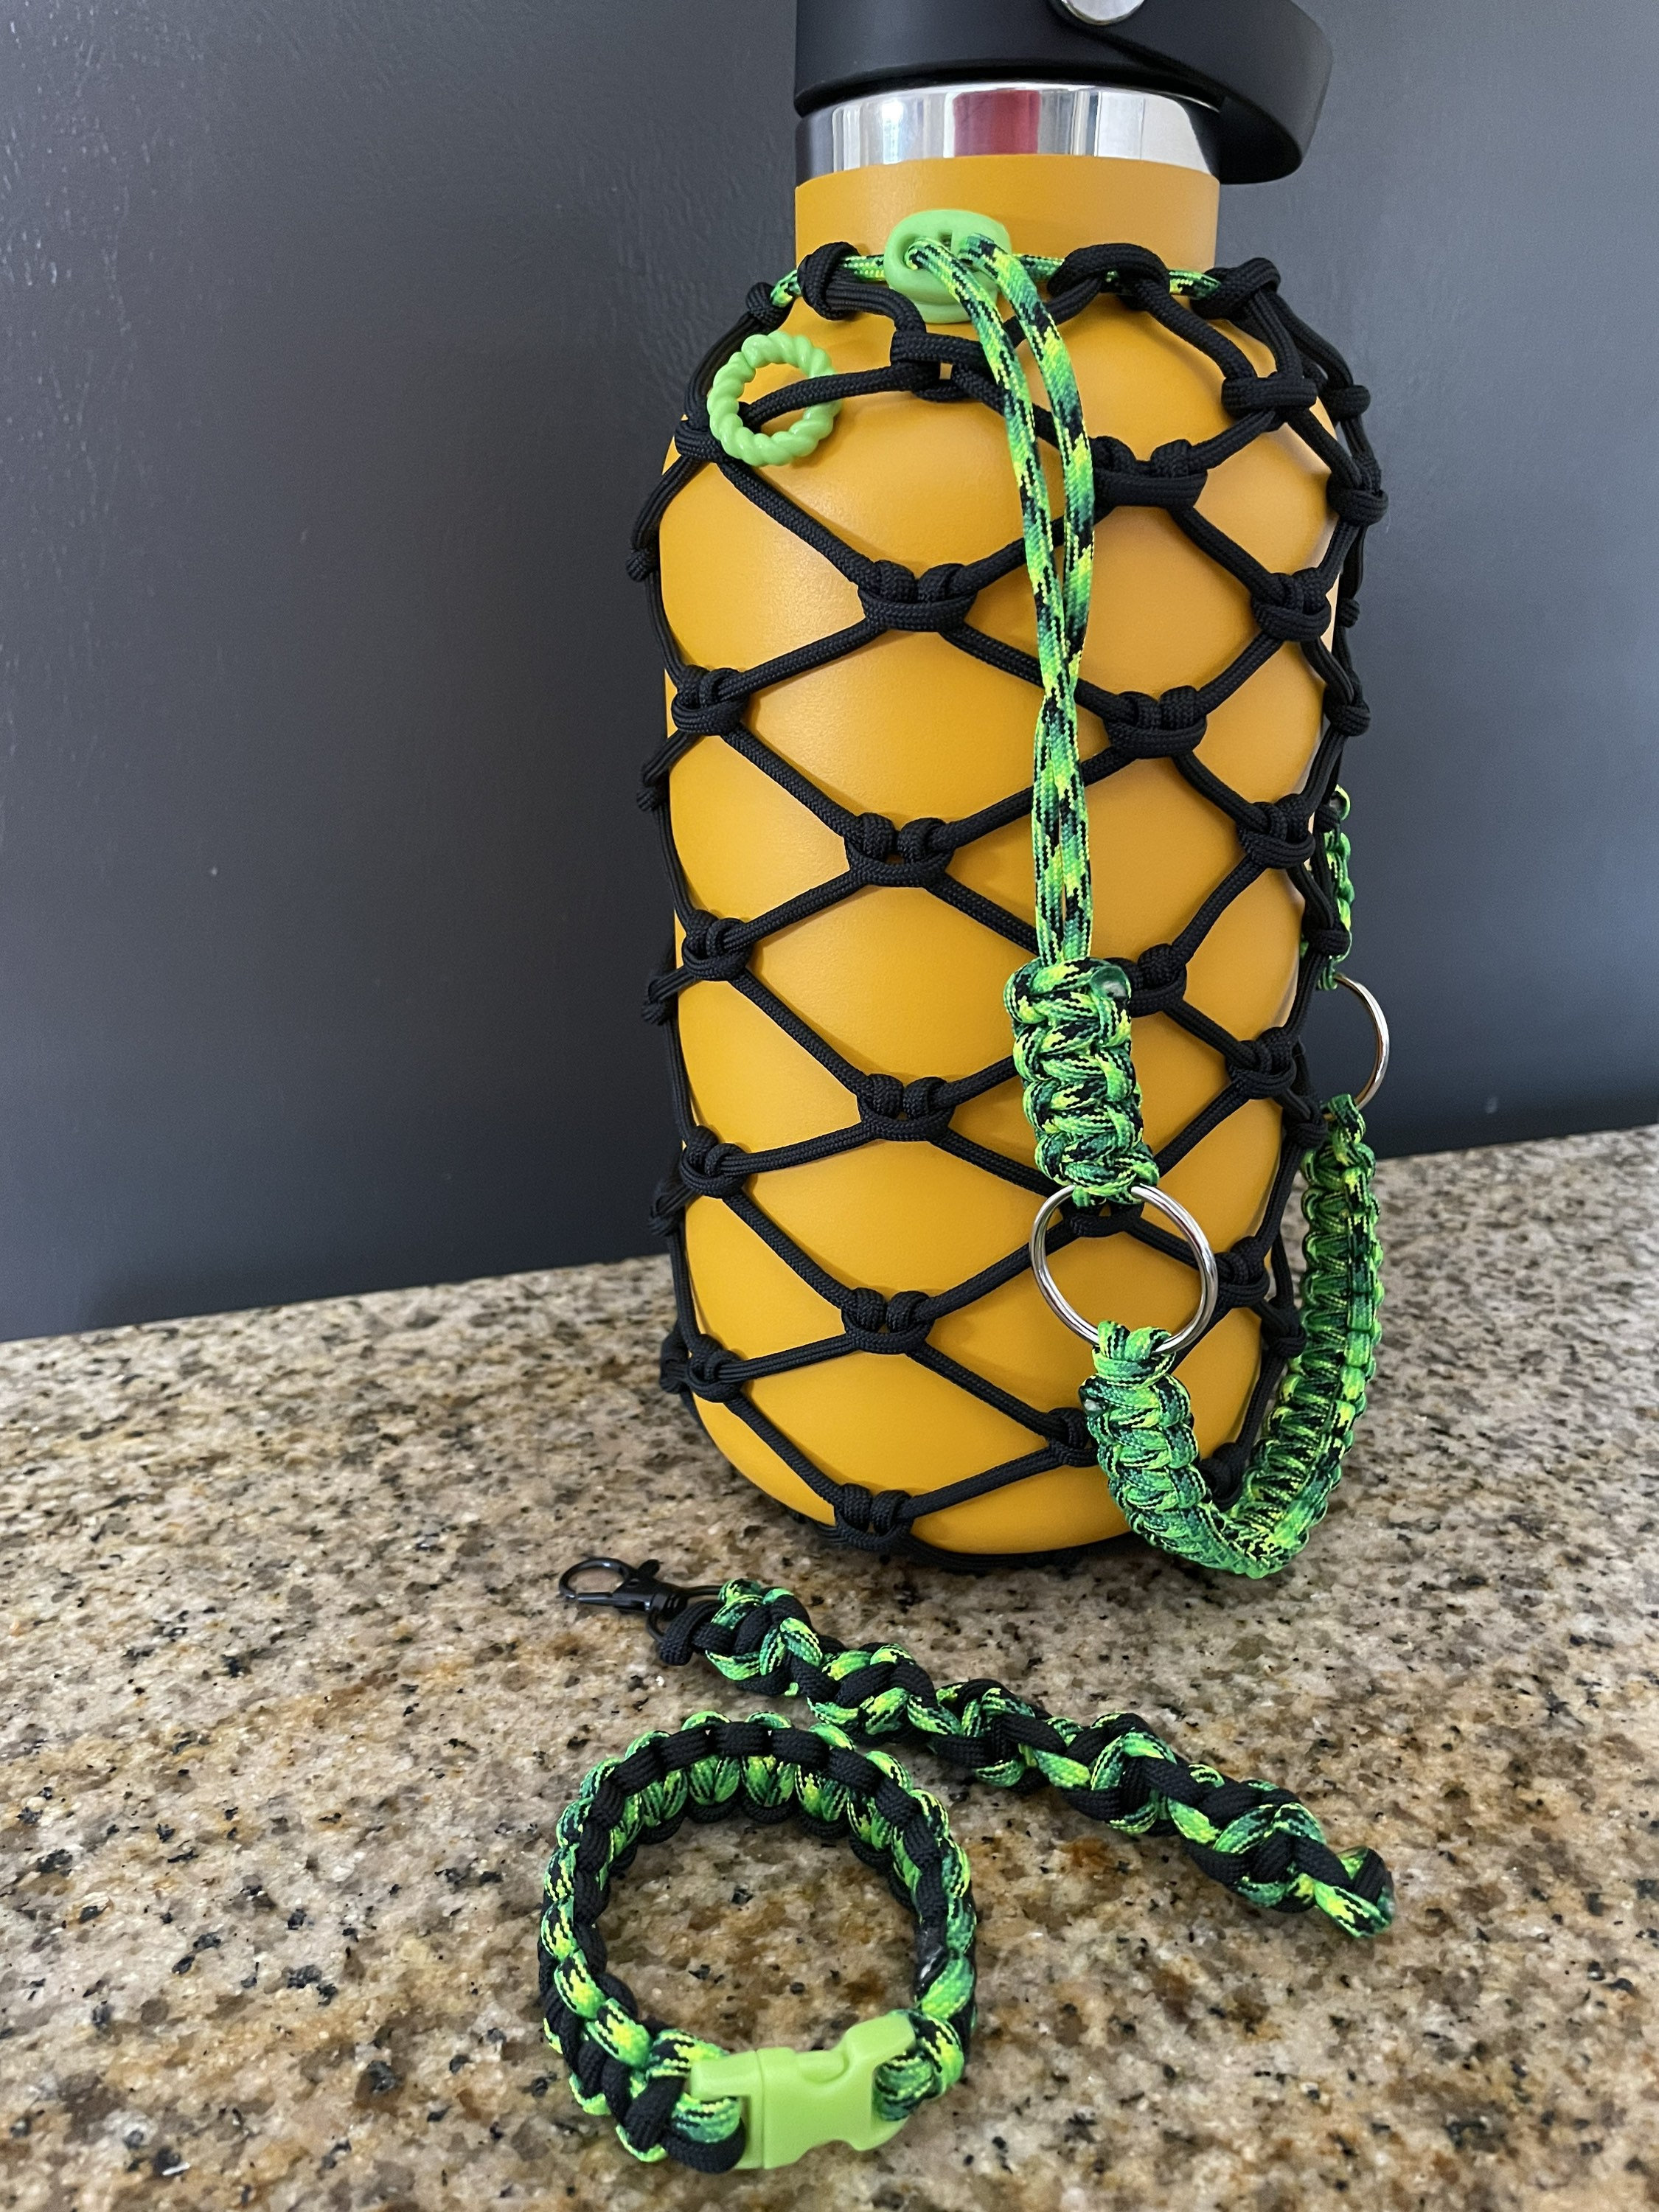 S'well Bottle Paracord Handle, Swell Bottle Paracord Handle 